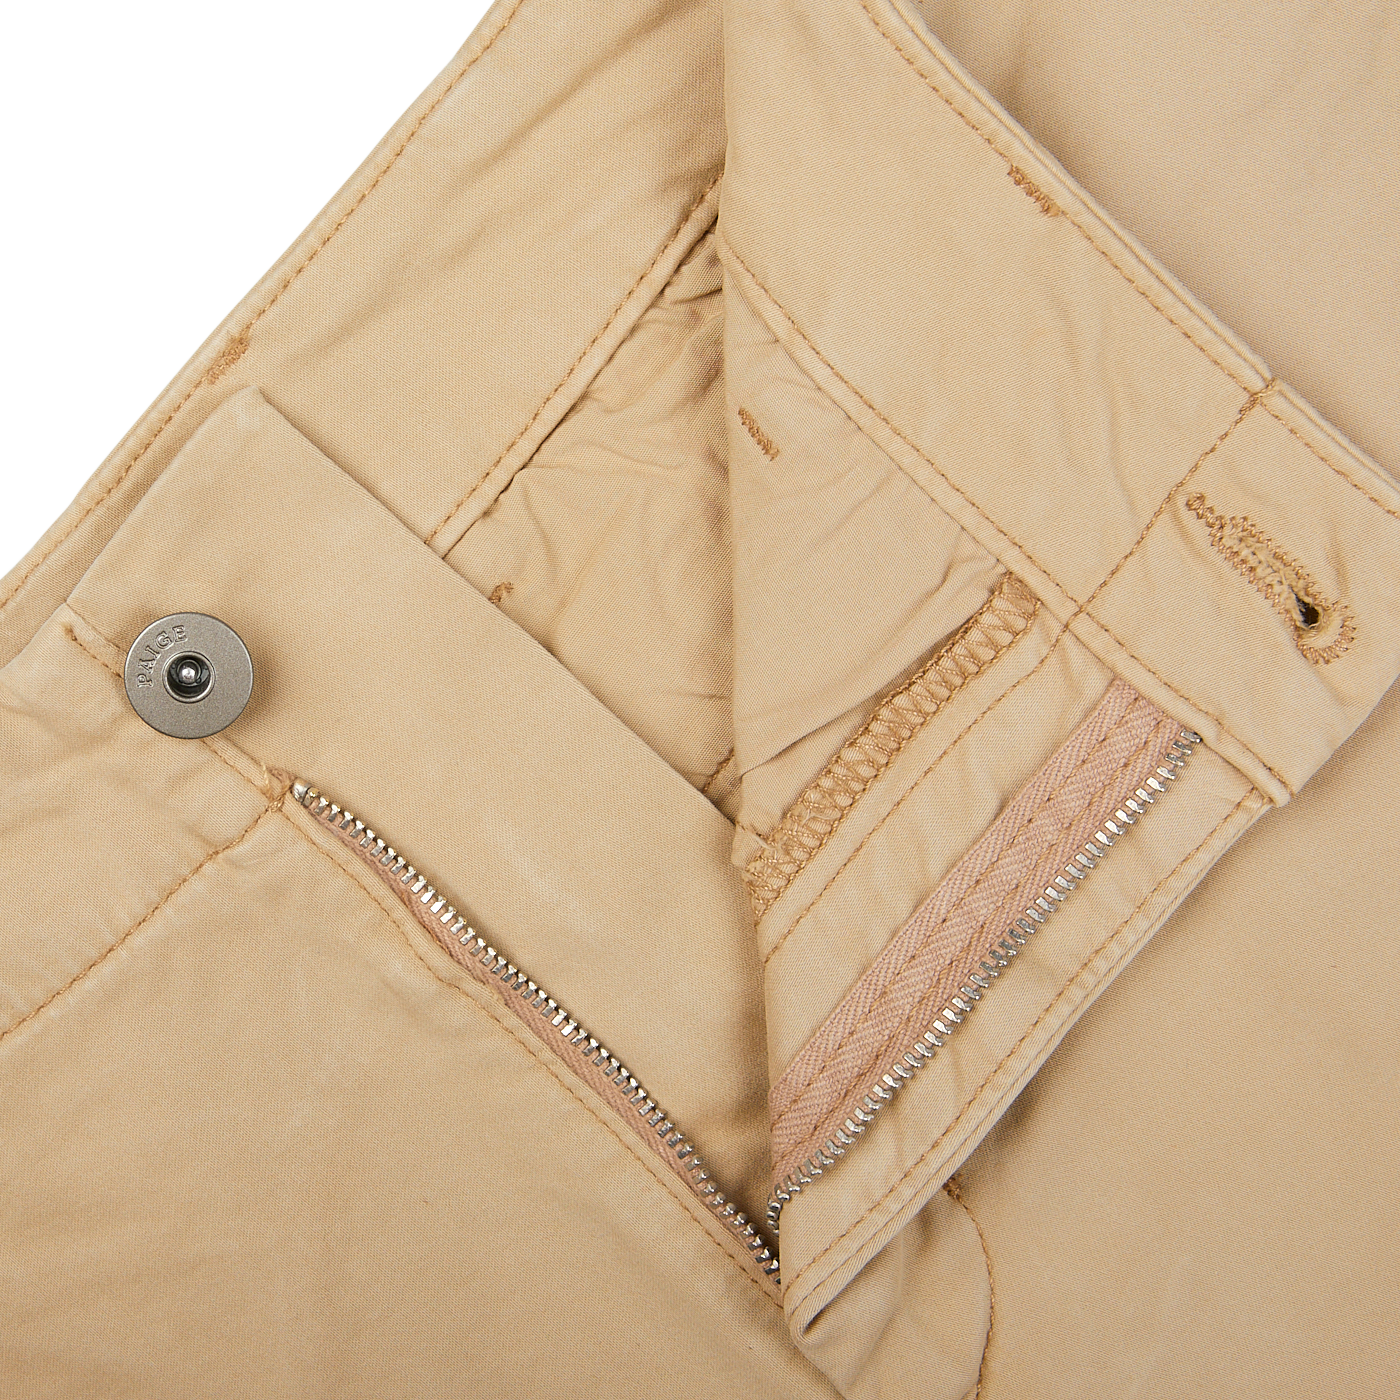 Khaki Beige Cotton Blend Phillips Shorts with zipper and button details from Paige.